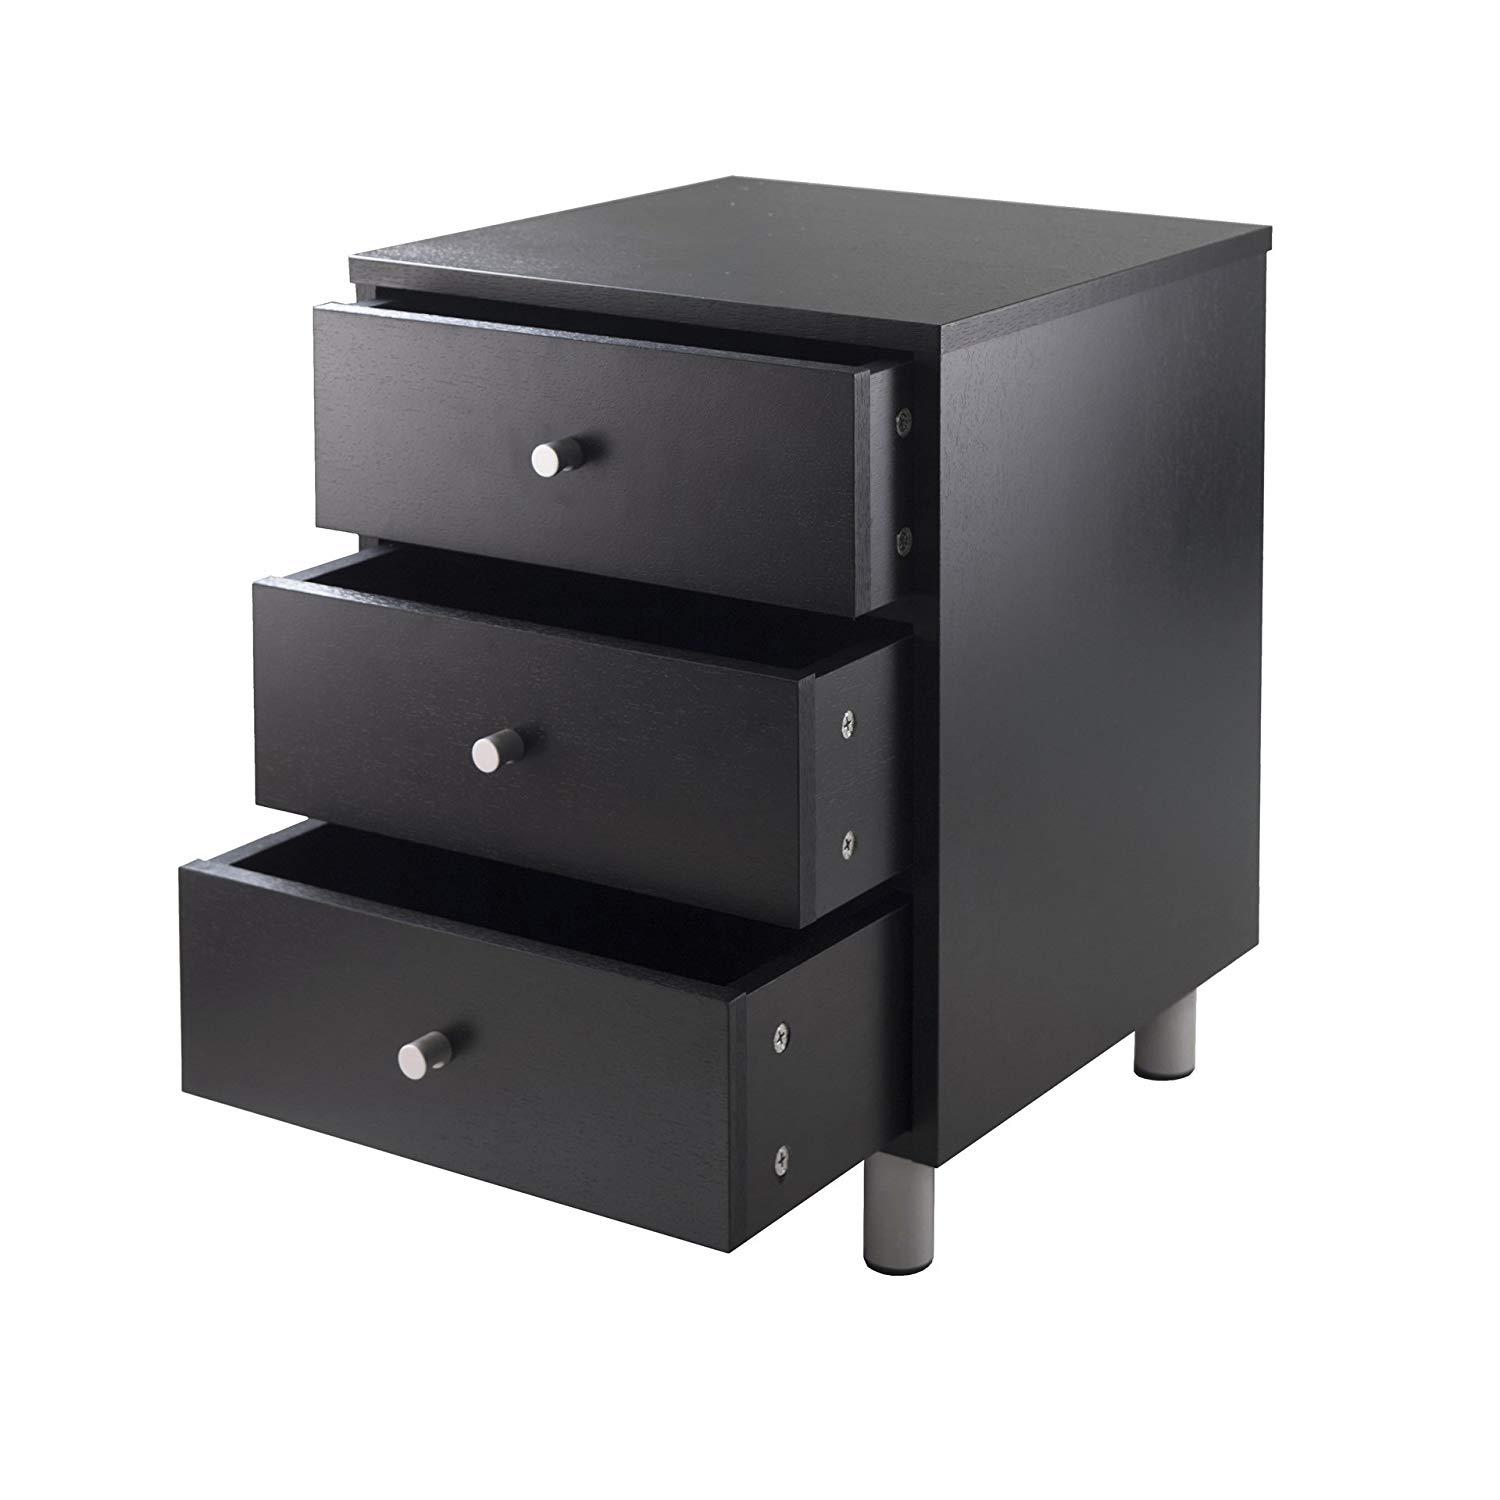 winsome daniel accent table with drawer black finish squamish espresso kitchen dining hampton bay lawn furniture decor cabinets sectional patio concrete cocktail outdoor wicker